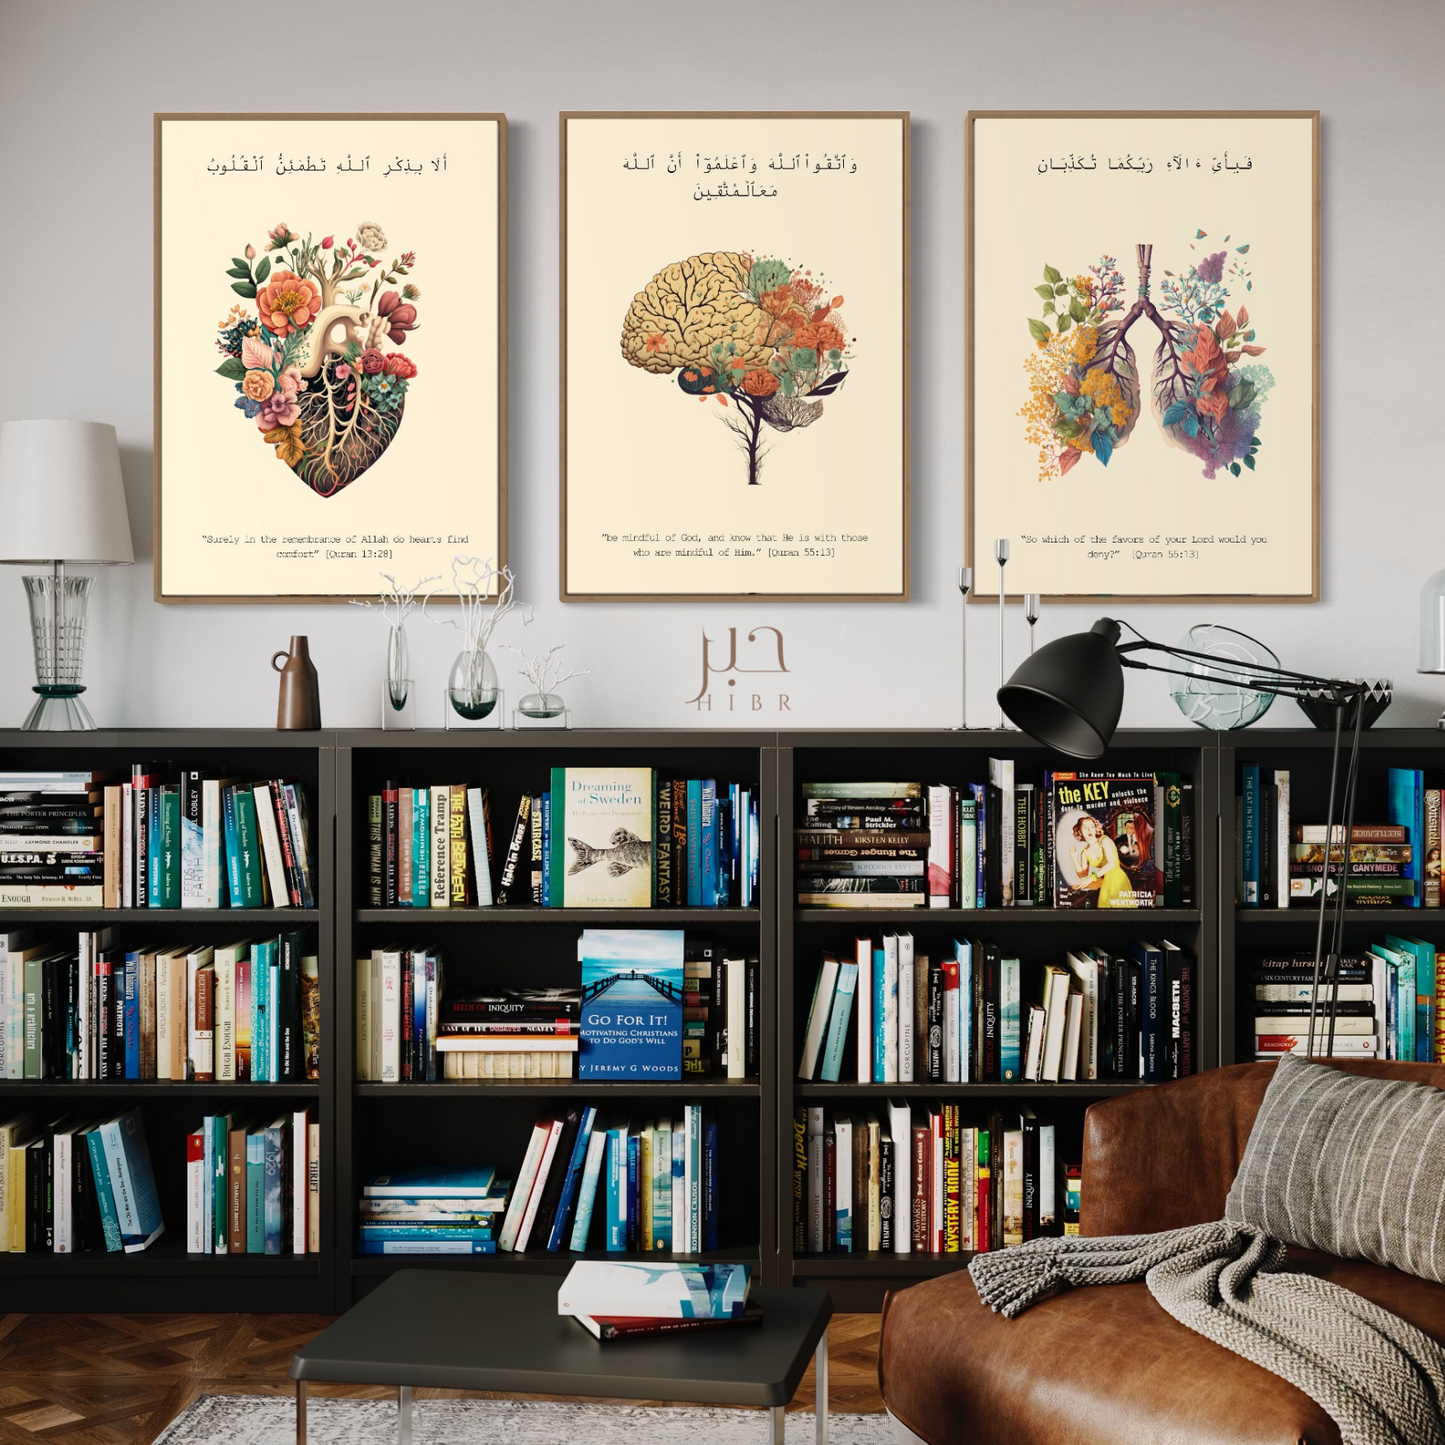 Creation in Bloom: Anatomy Prints with Quranic Ayahs